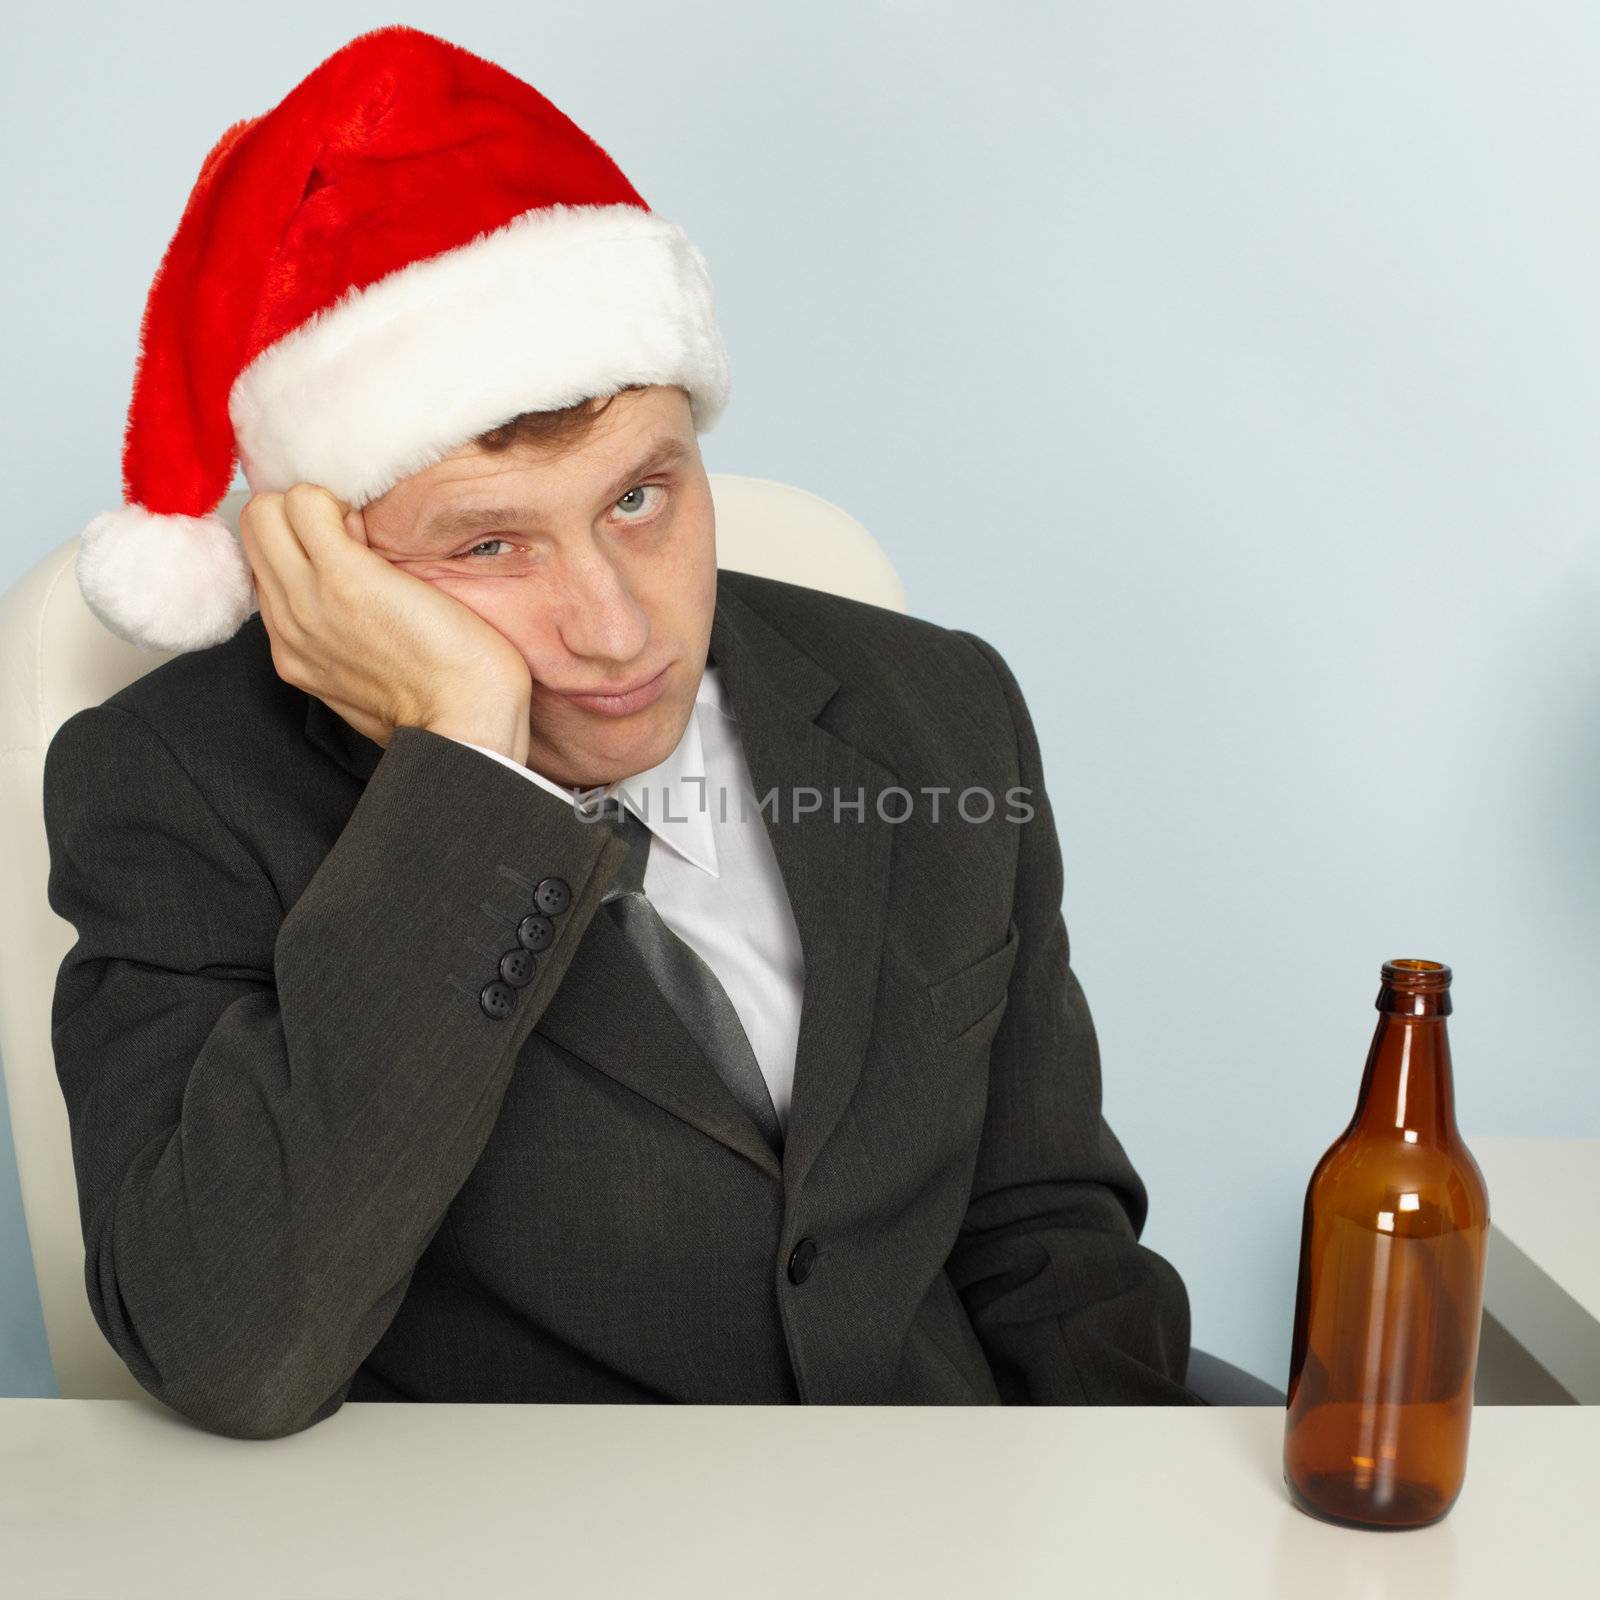 Sad man suffering from hangover after Christmas by pzaxe